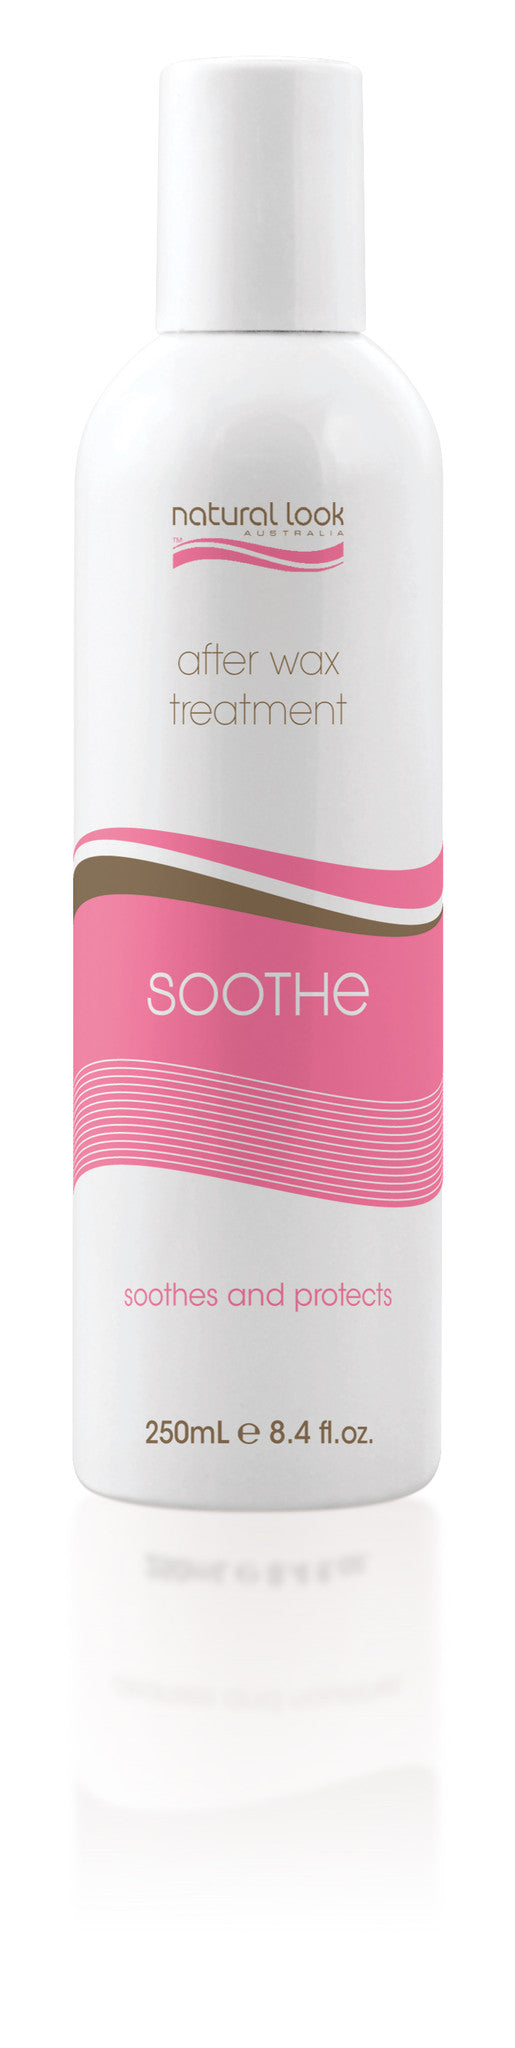 Natural Look Soothe After Wax treatment